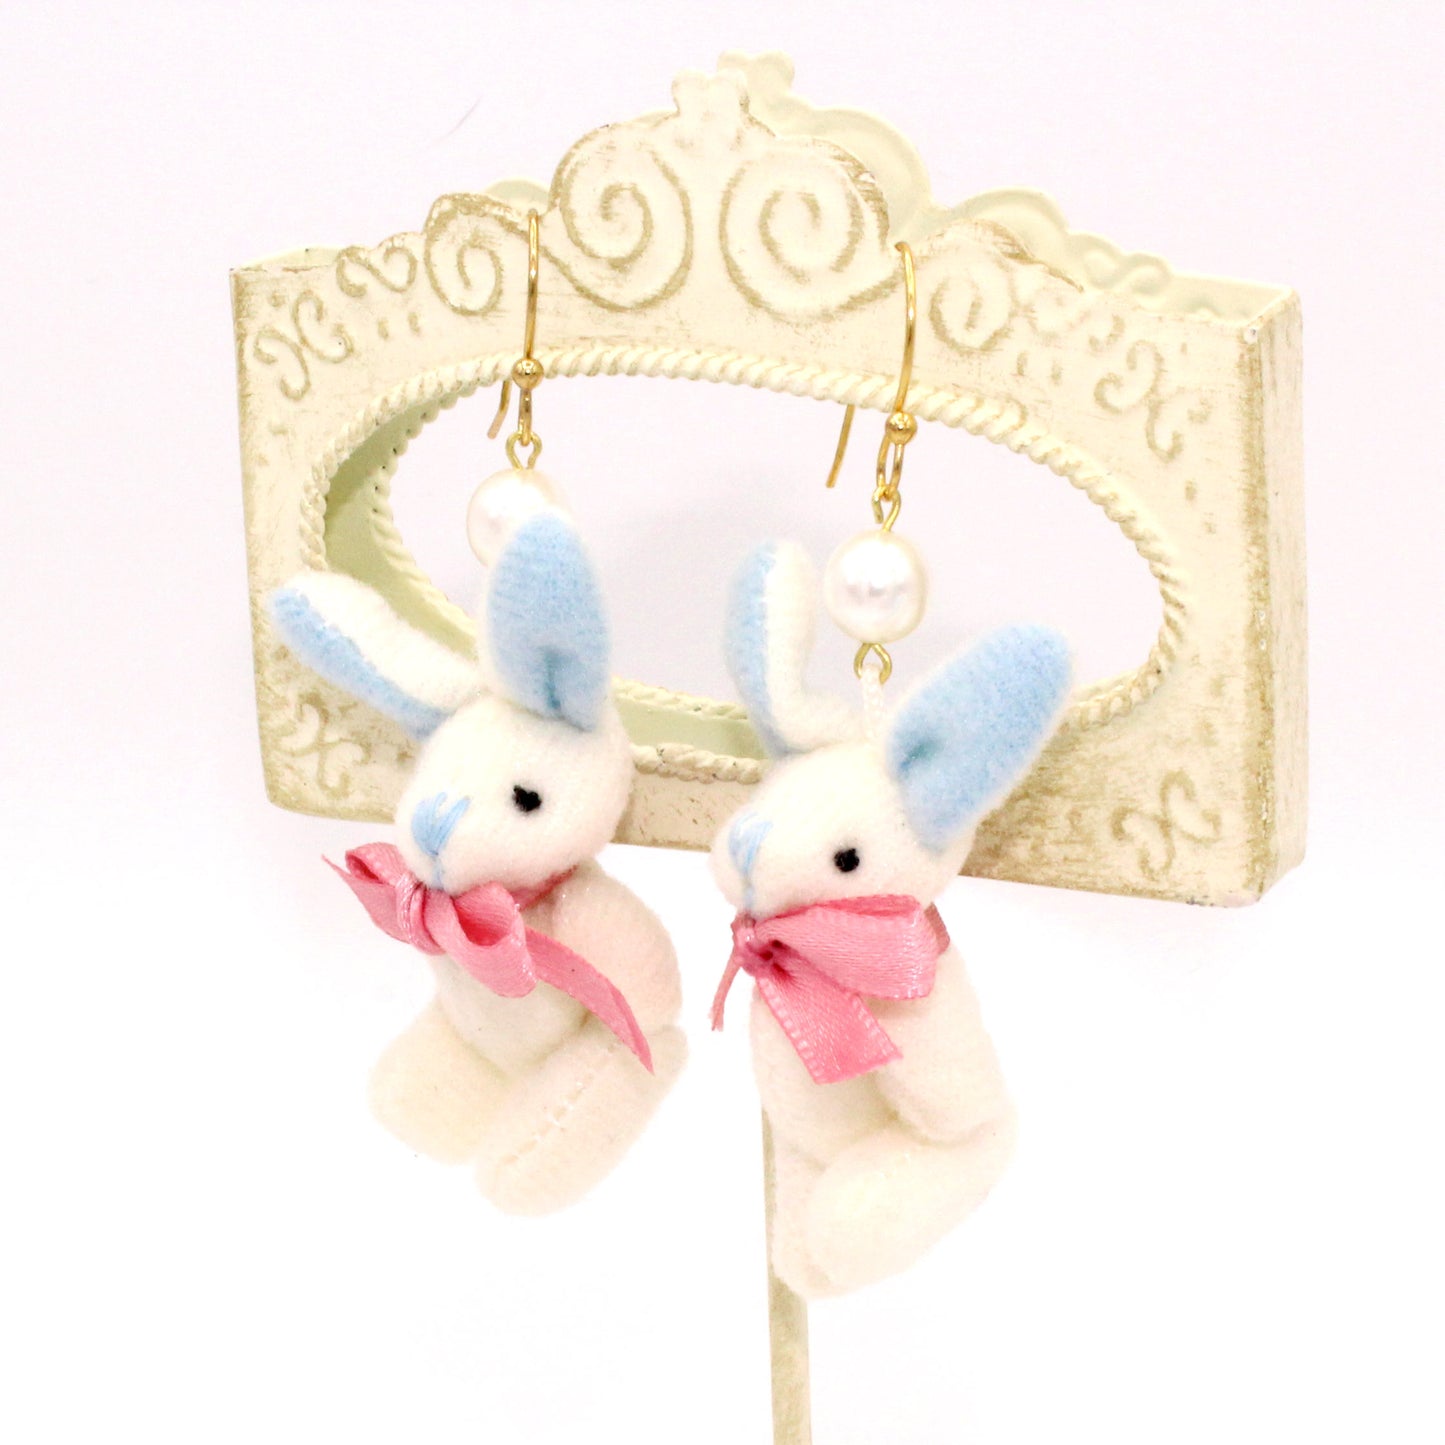 Plush Pastel Bunny Earrings - Pink or White - Hypoallergenic